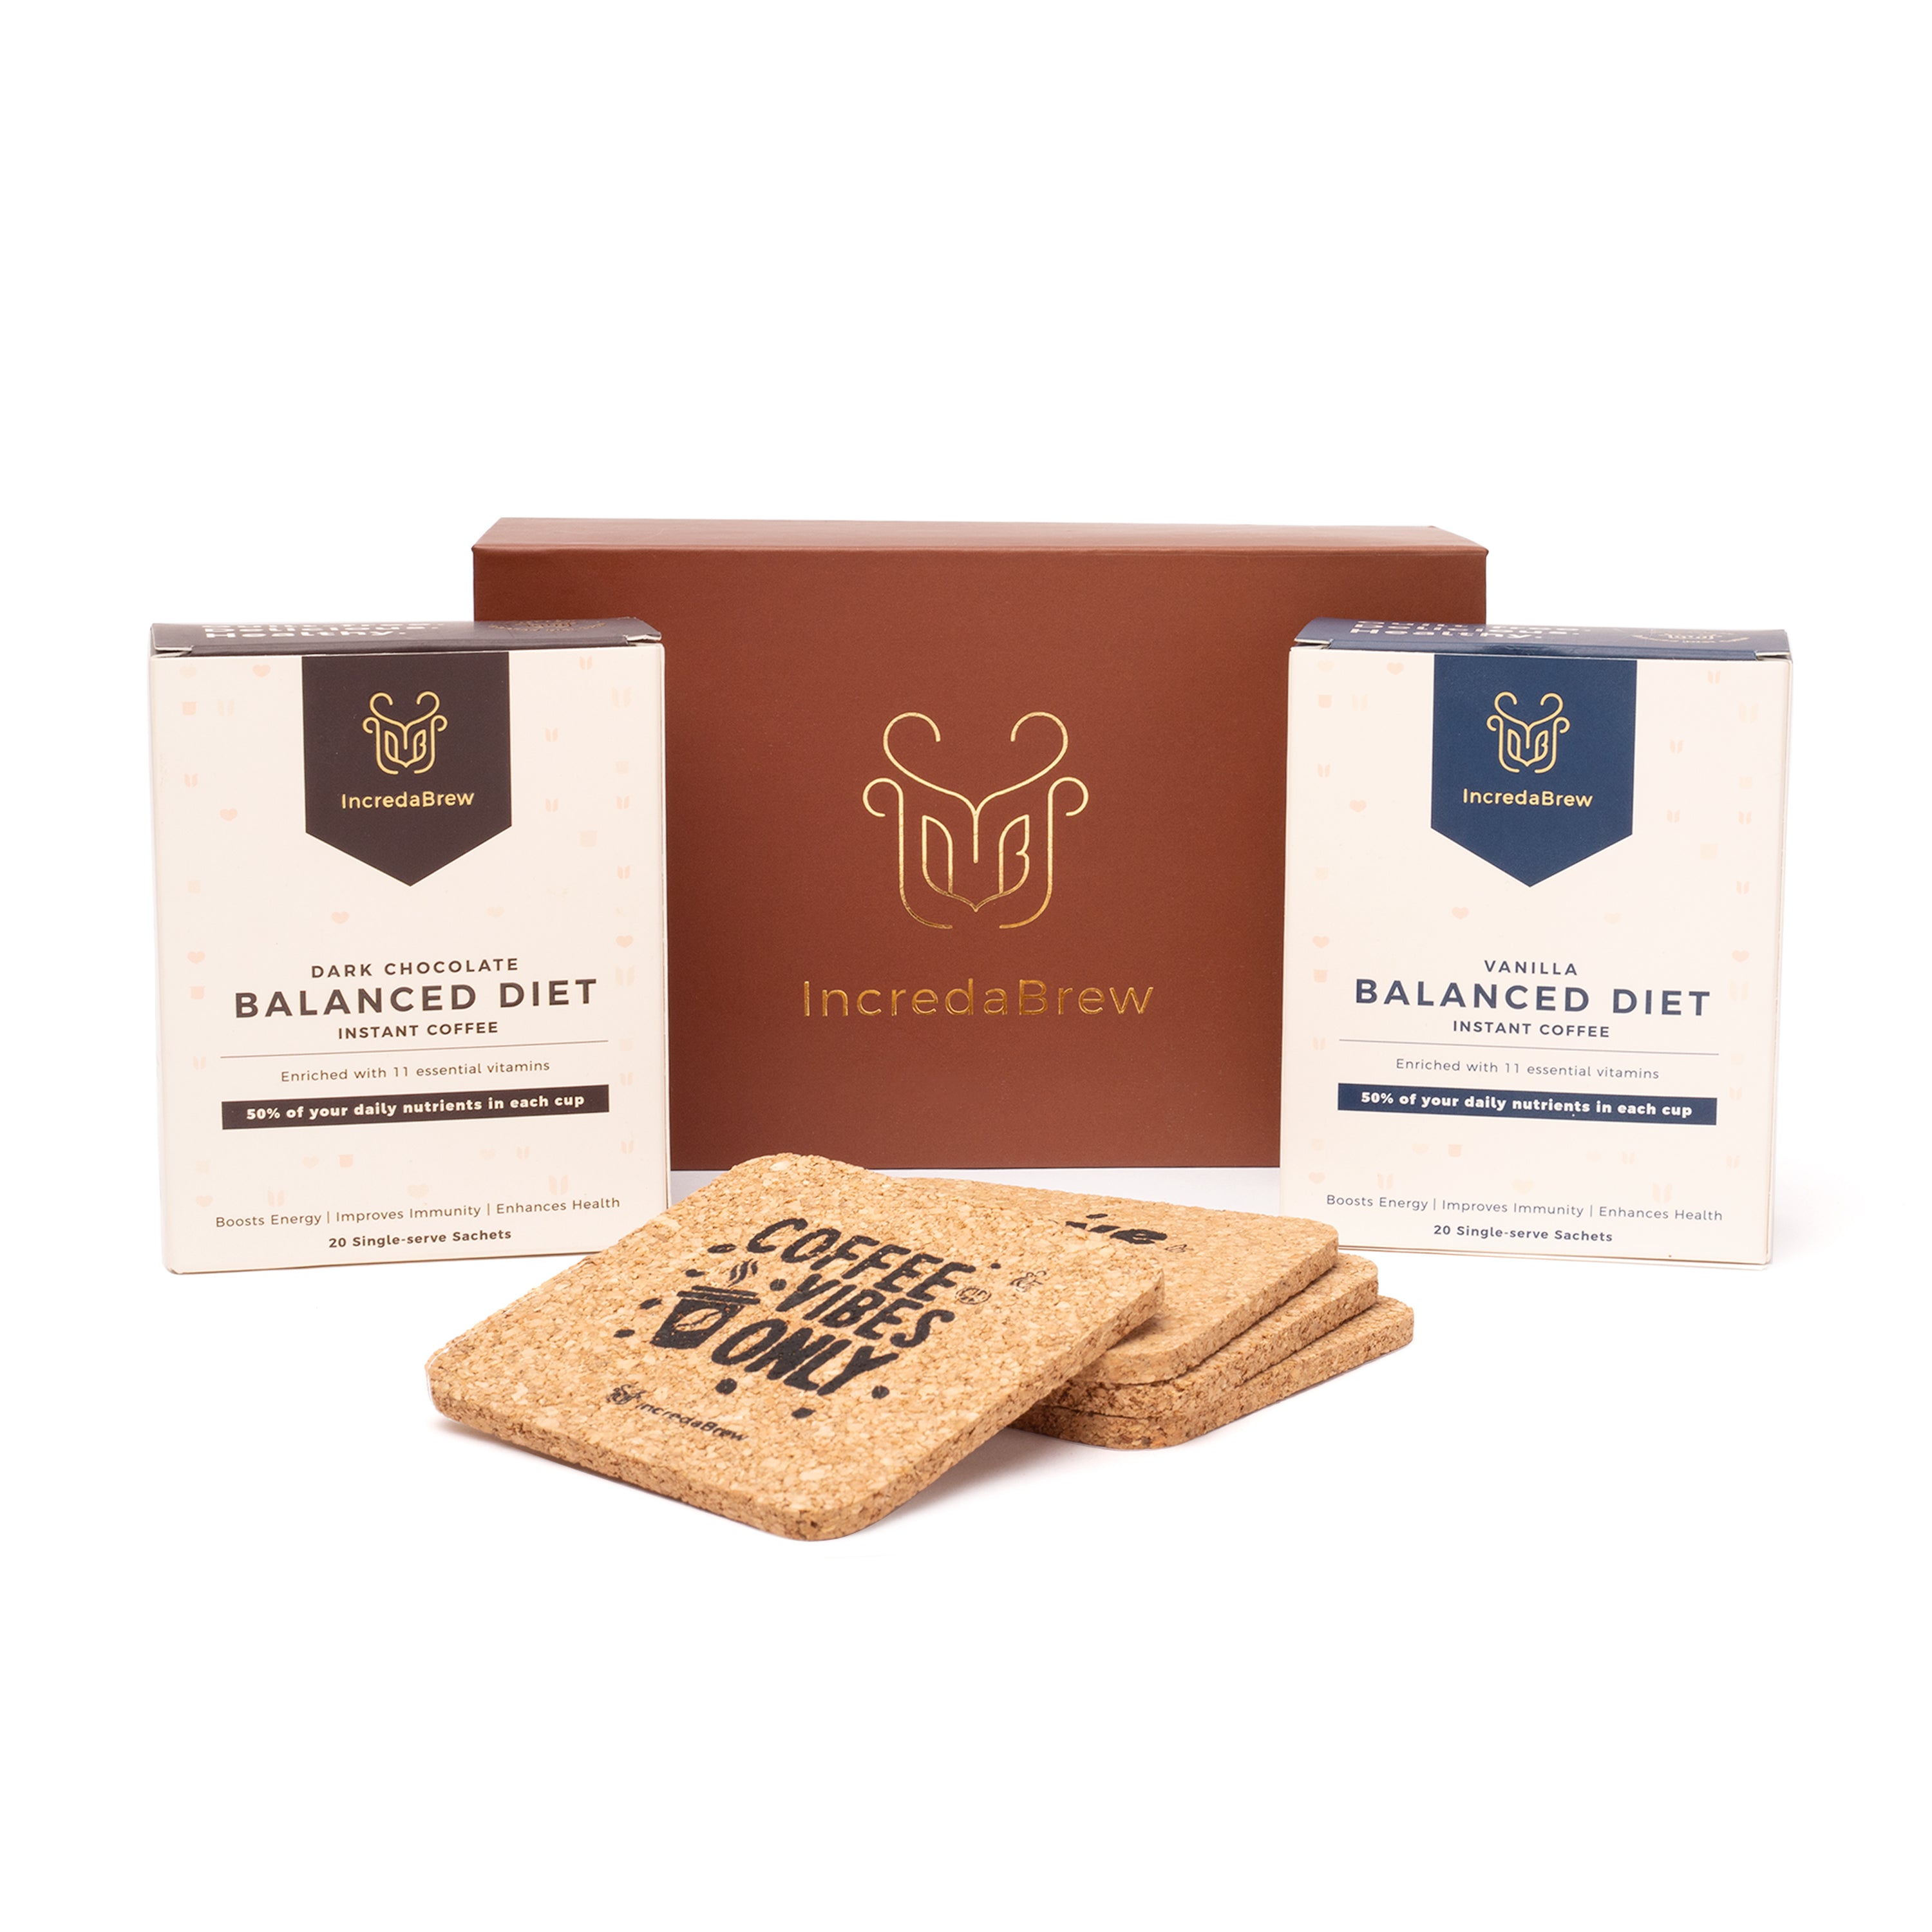 Incredabrew Any 2 Coffee Boxes & 4 Coasters Giftset